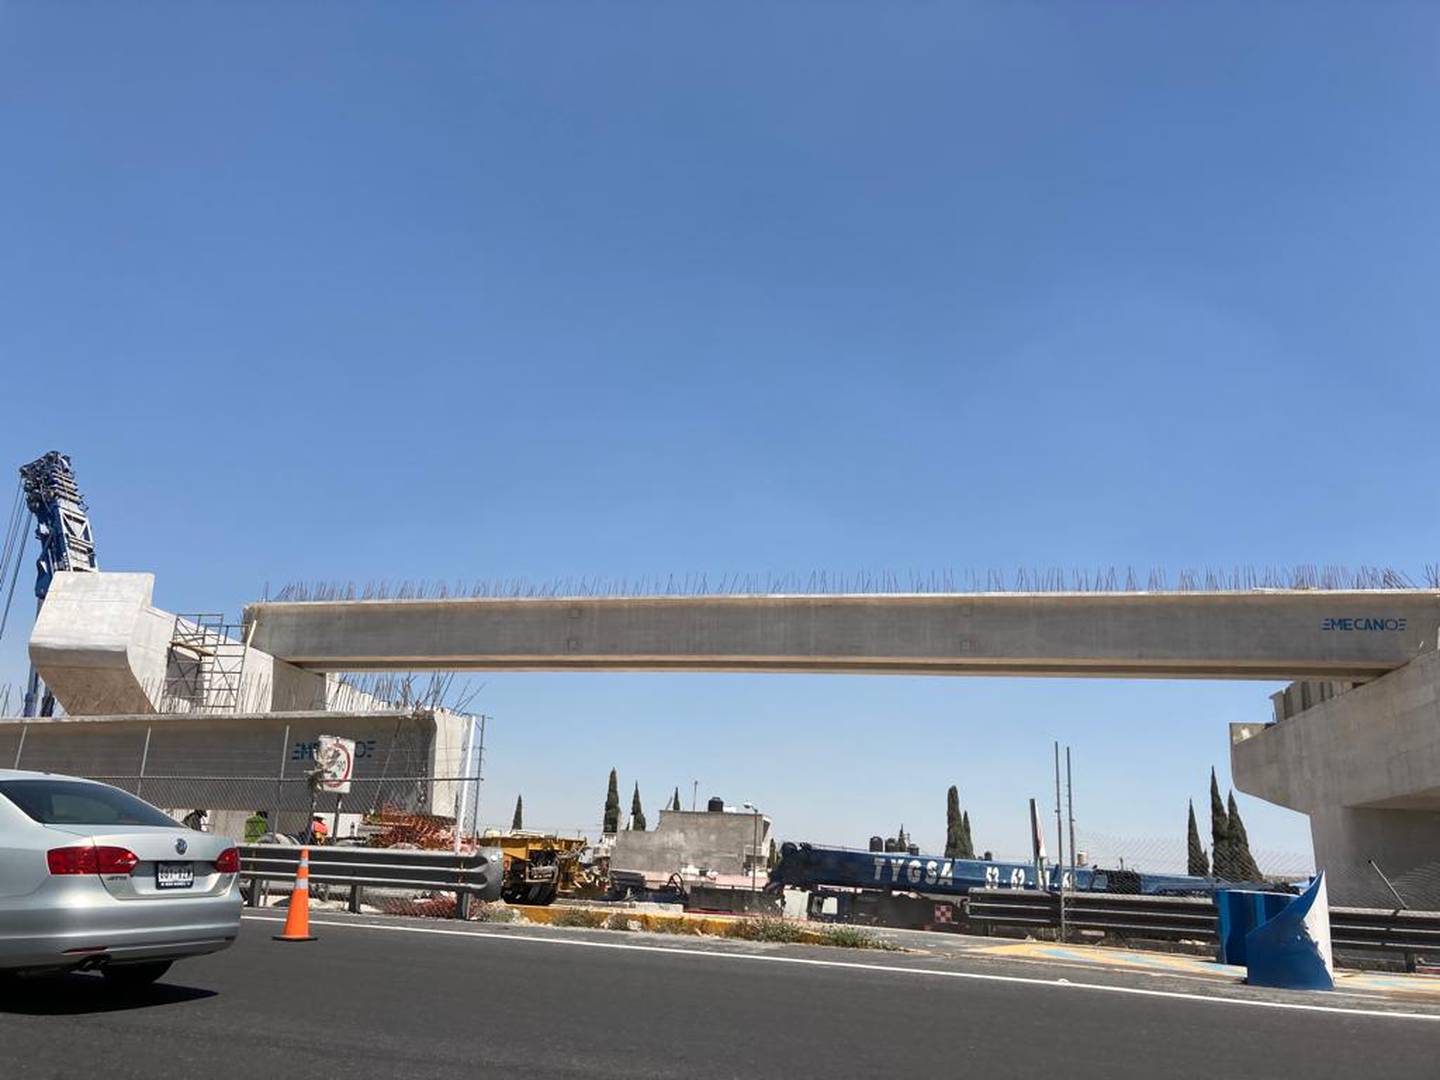 Works that form part of the viaduct that will provide access from the Mexico City–Pachuca highway to Tonanitla, and which was among the first public-private sector infrastructure projects announced by the Mexican government in November 2019. (Photo: Zenyazen Flores)dfd